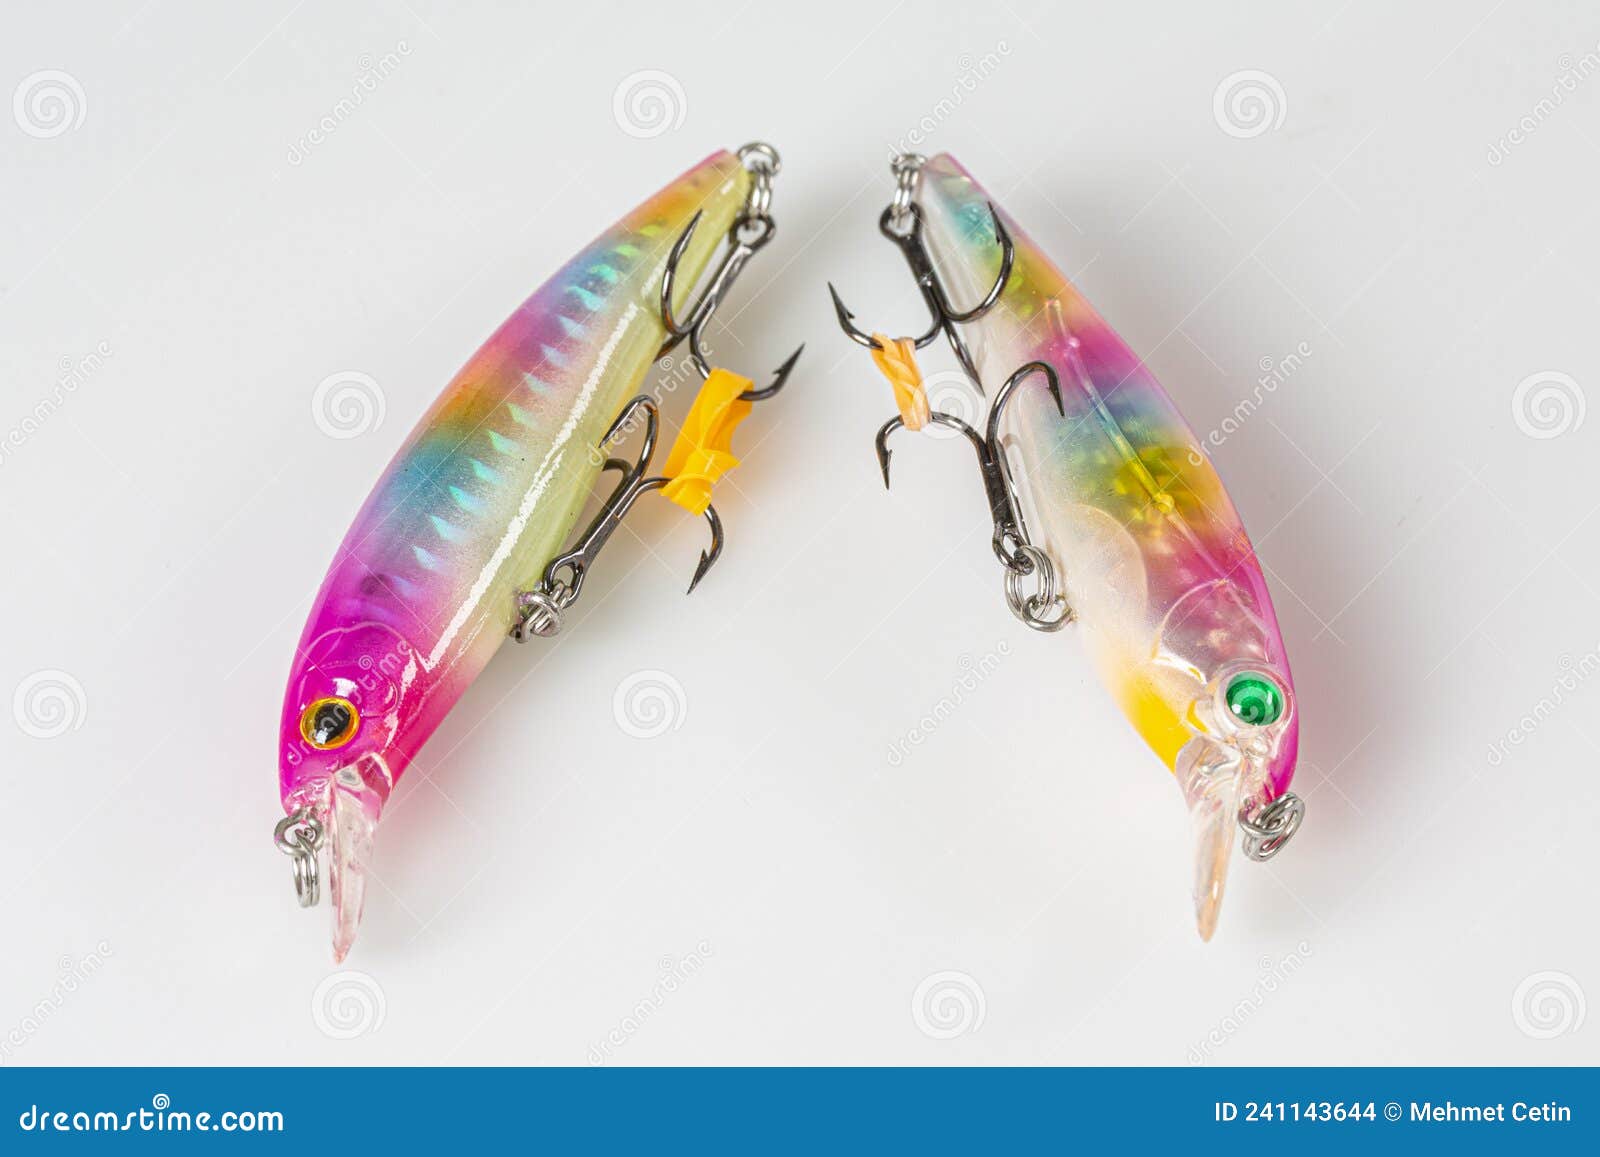 Fishing Lure Wobbler Fishing Temptations on White Background. Many Fishing  Spinning, Fake Bait, Artificial Lure Stock Photo - Image of angler, gear:  241143644